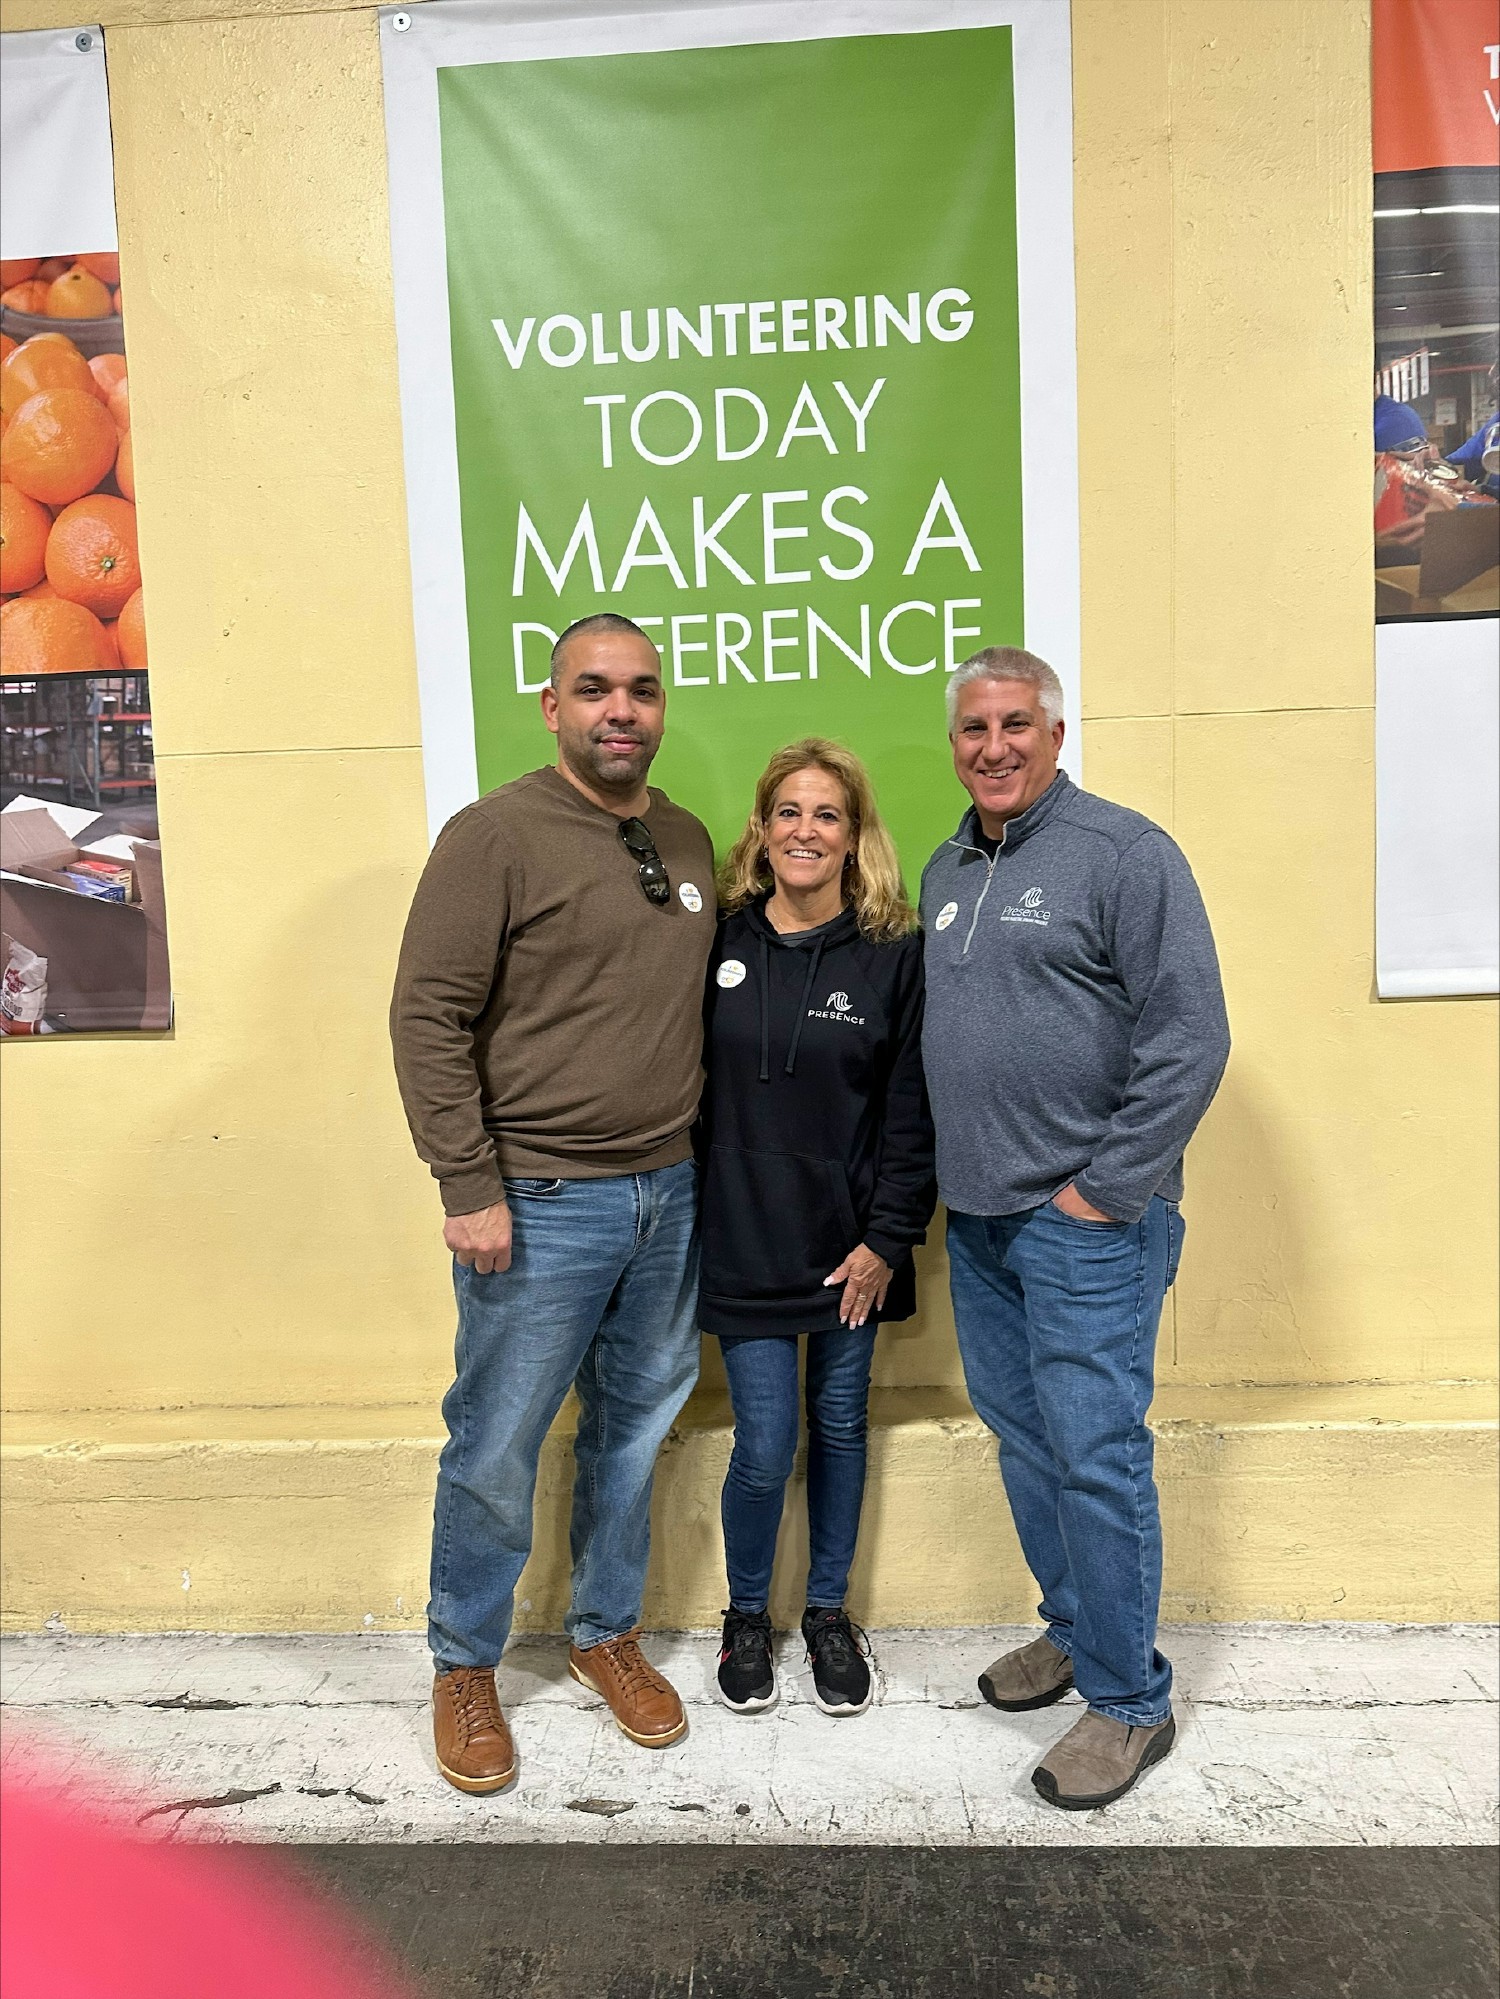 Some of our employees on the East Coast volunteering at their local food pantry.